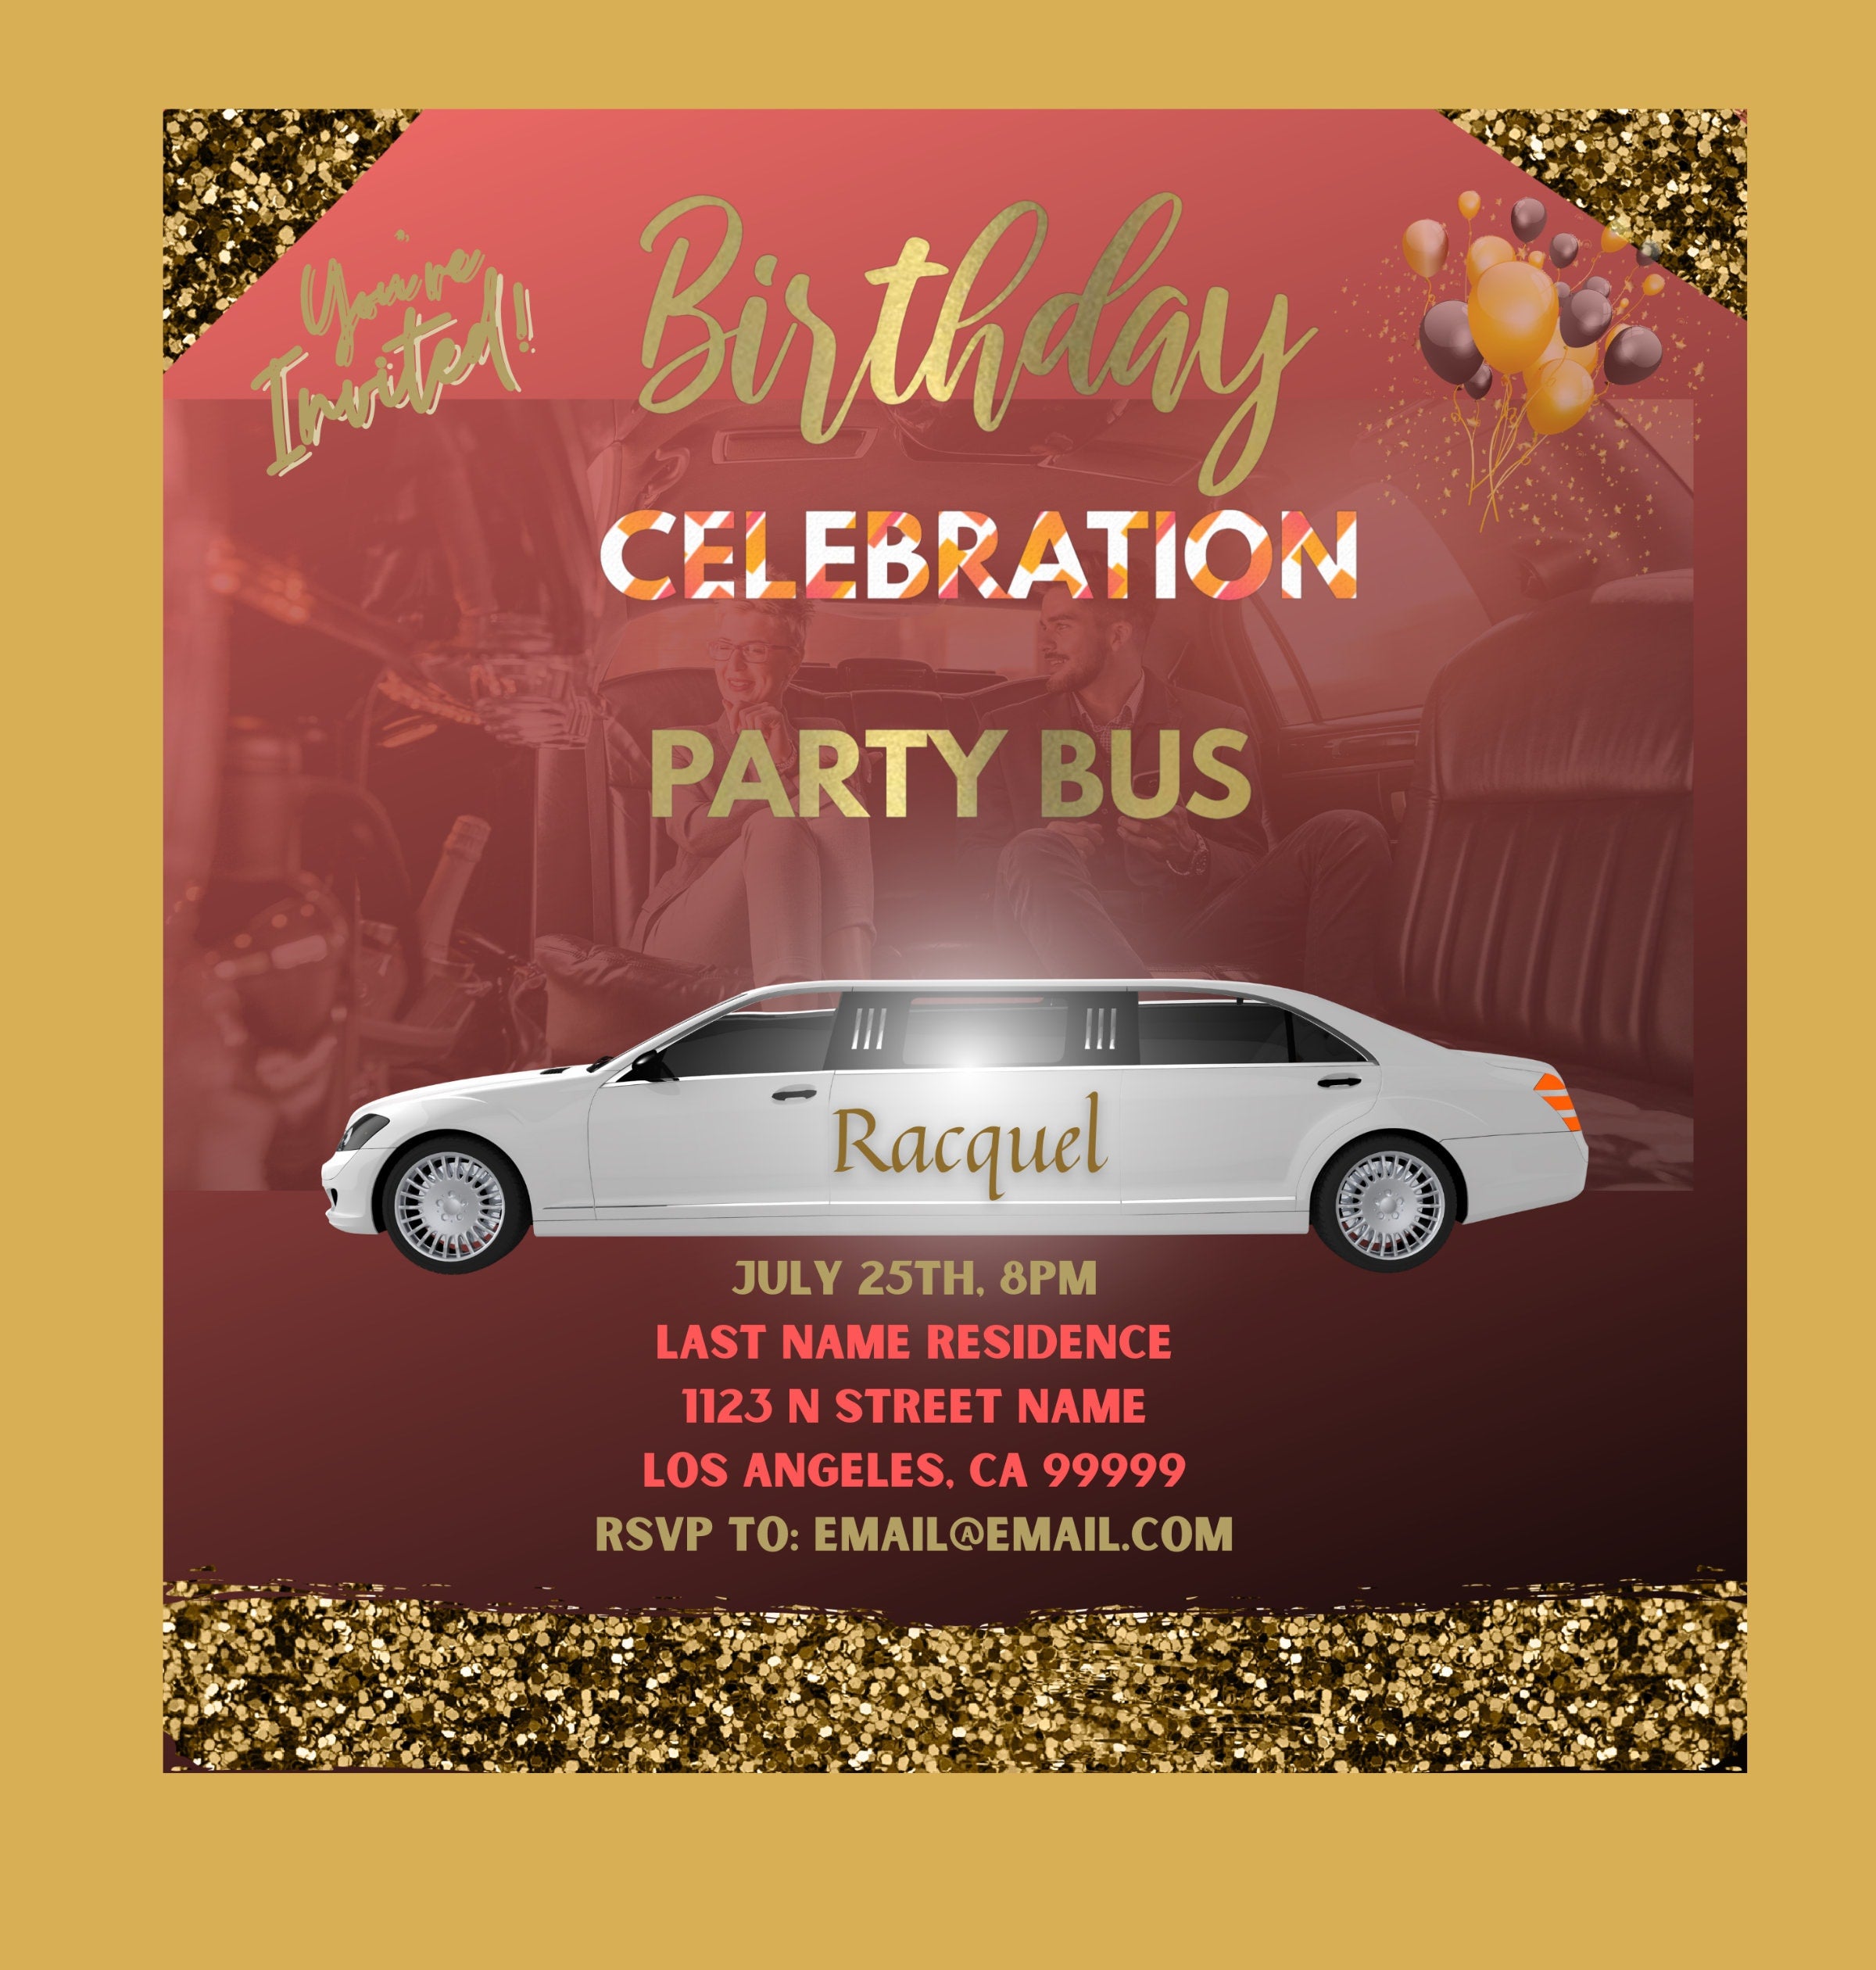 BUY 1 GET2 Party Celebration, Party Bus and Bonus Templates Instant Download